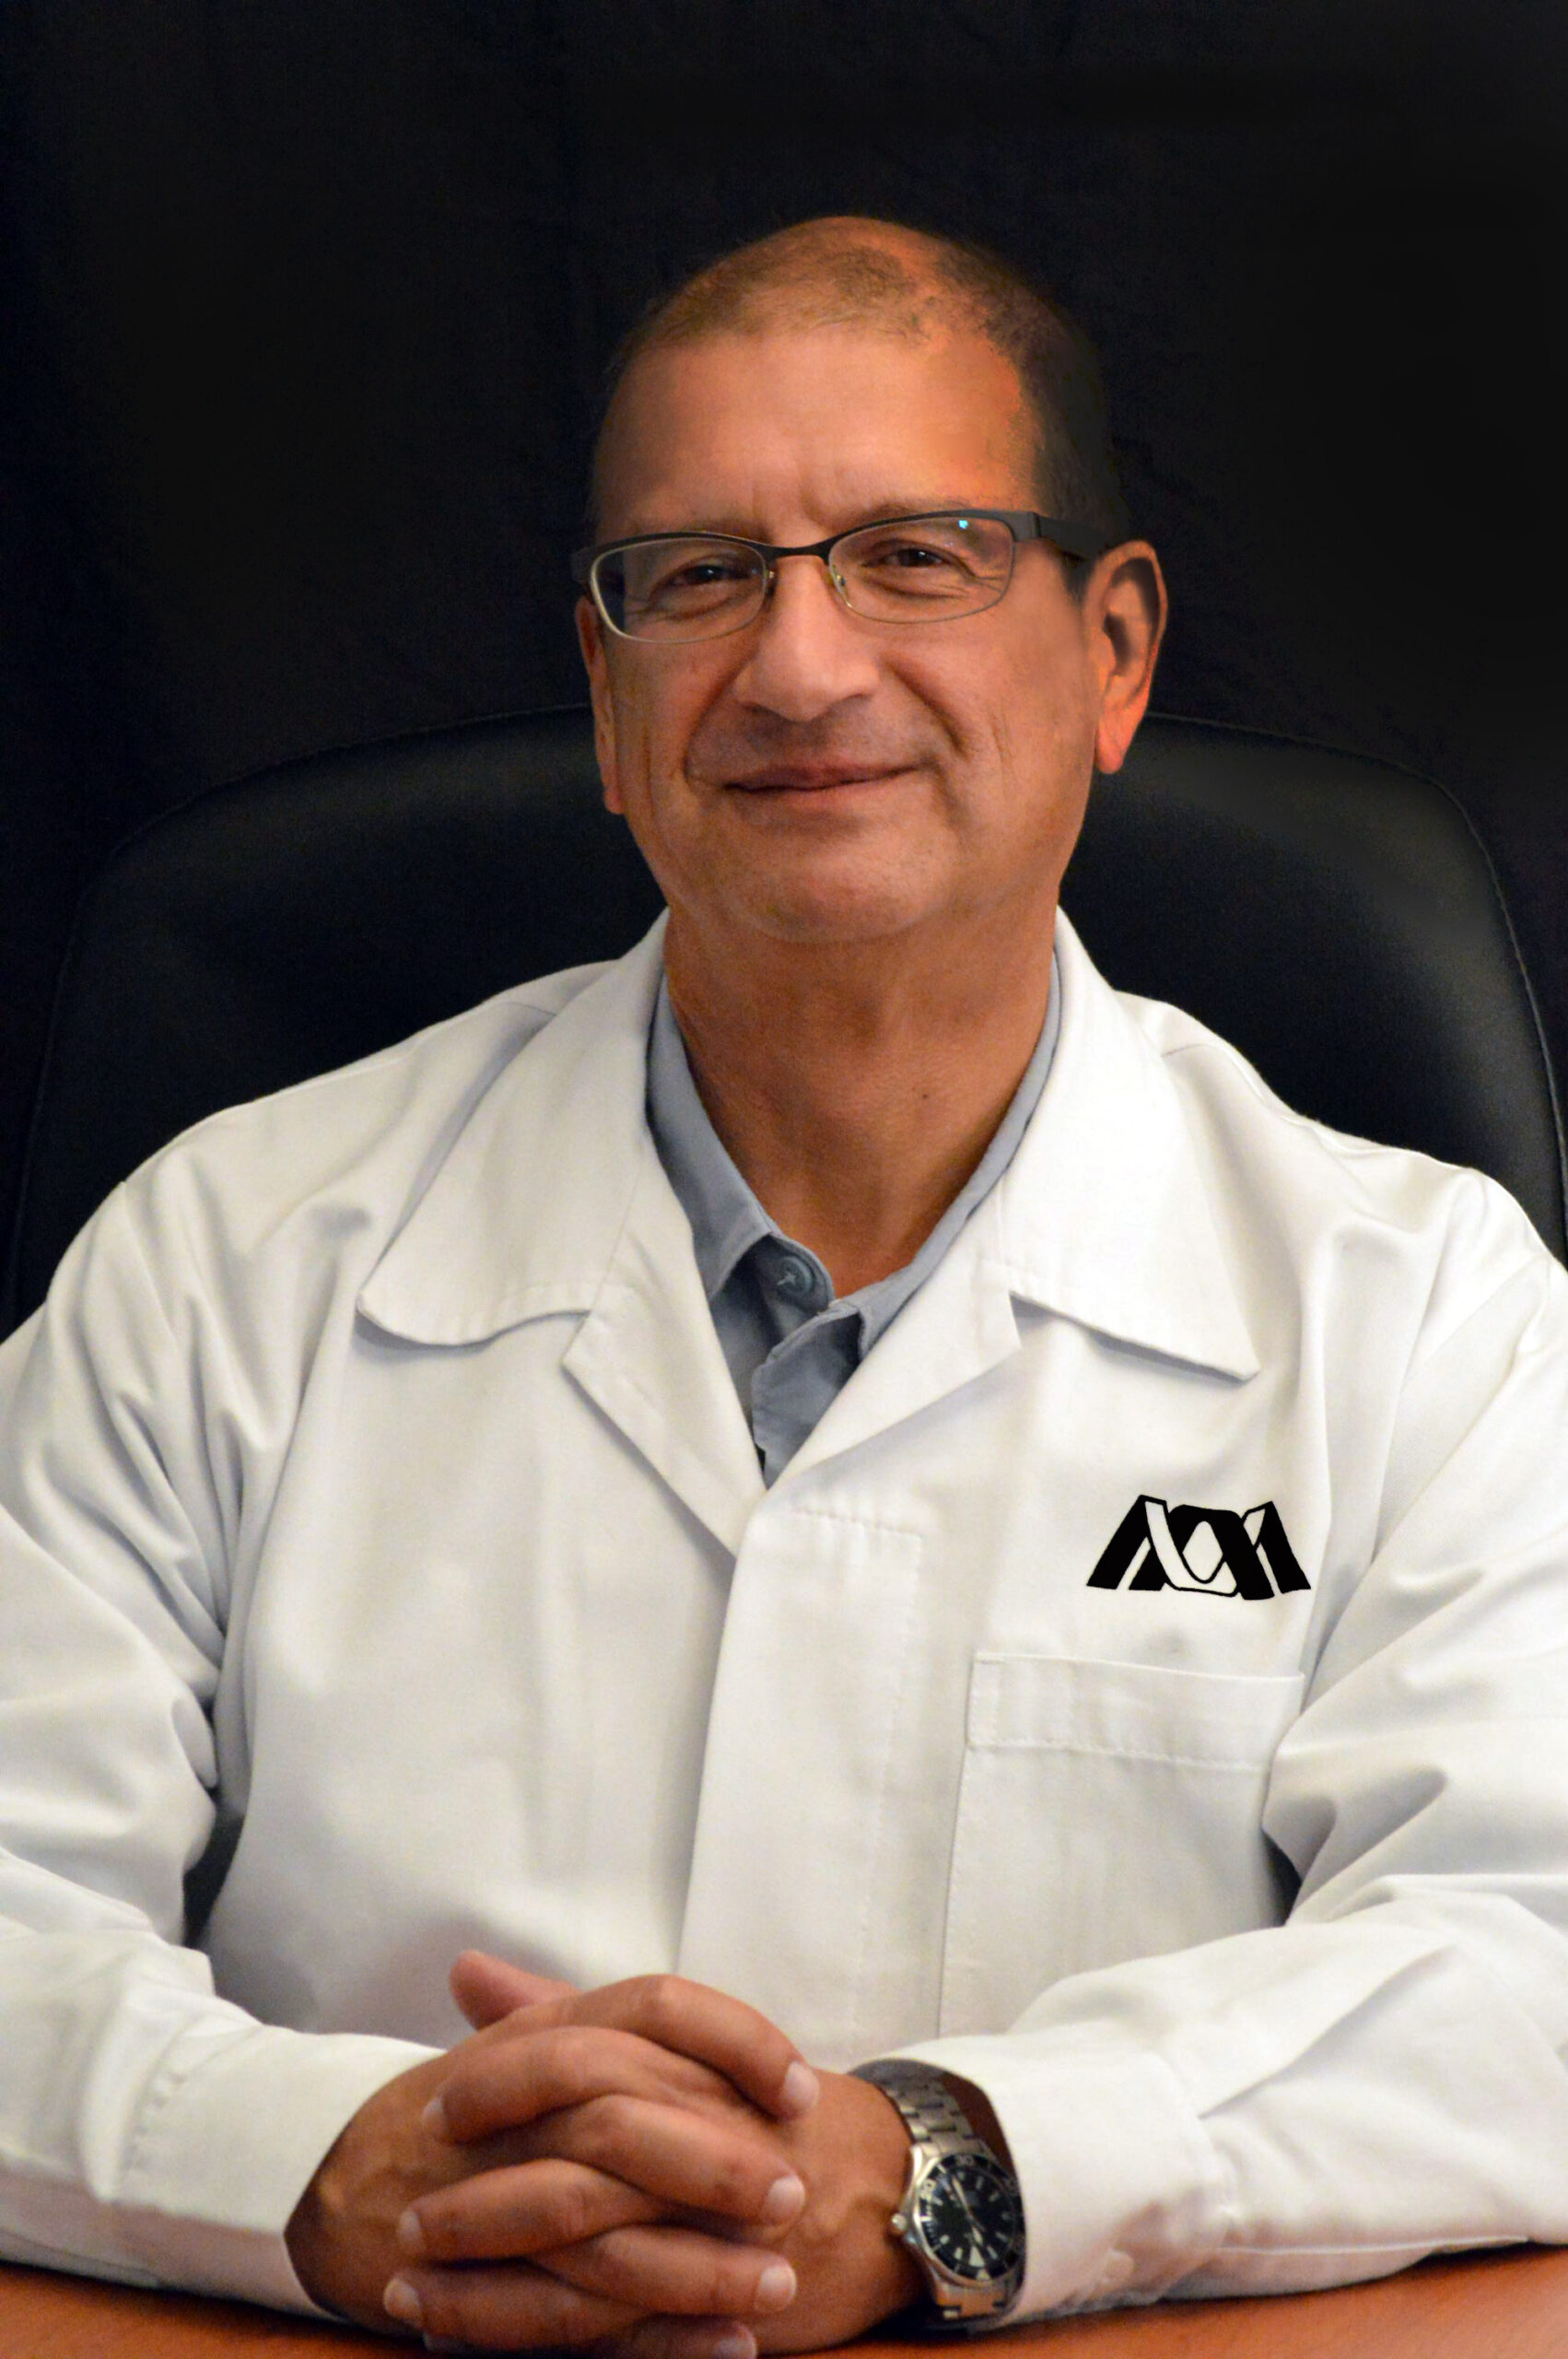 You are currently viewing Dr. Joaquín Azpiroz Leehan